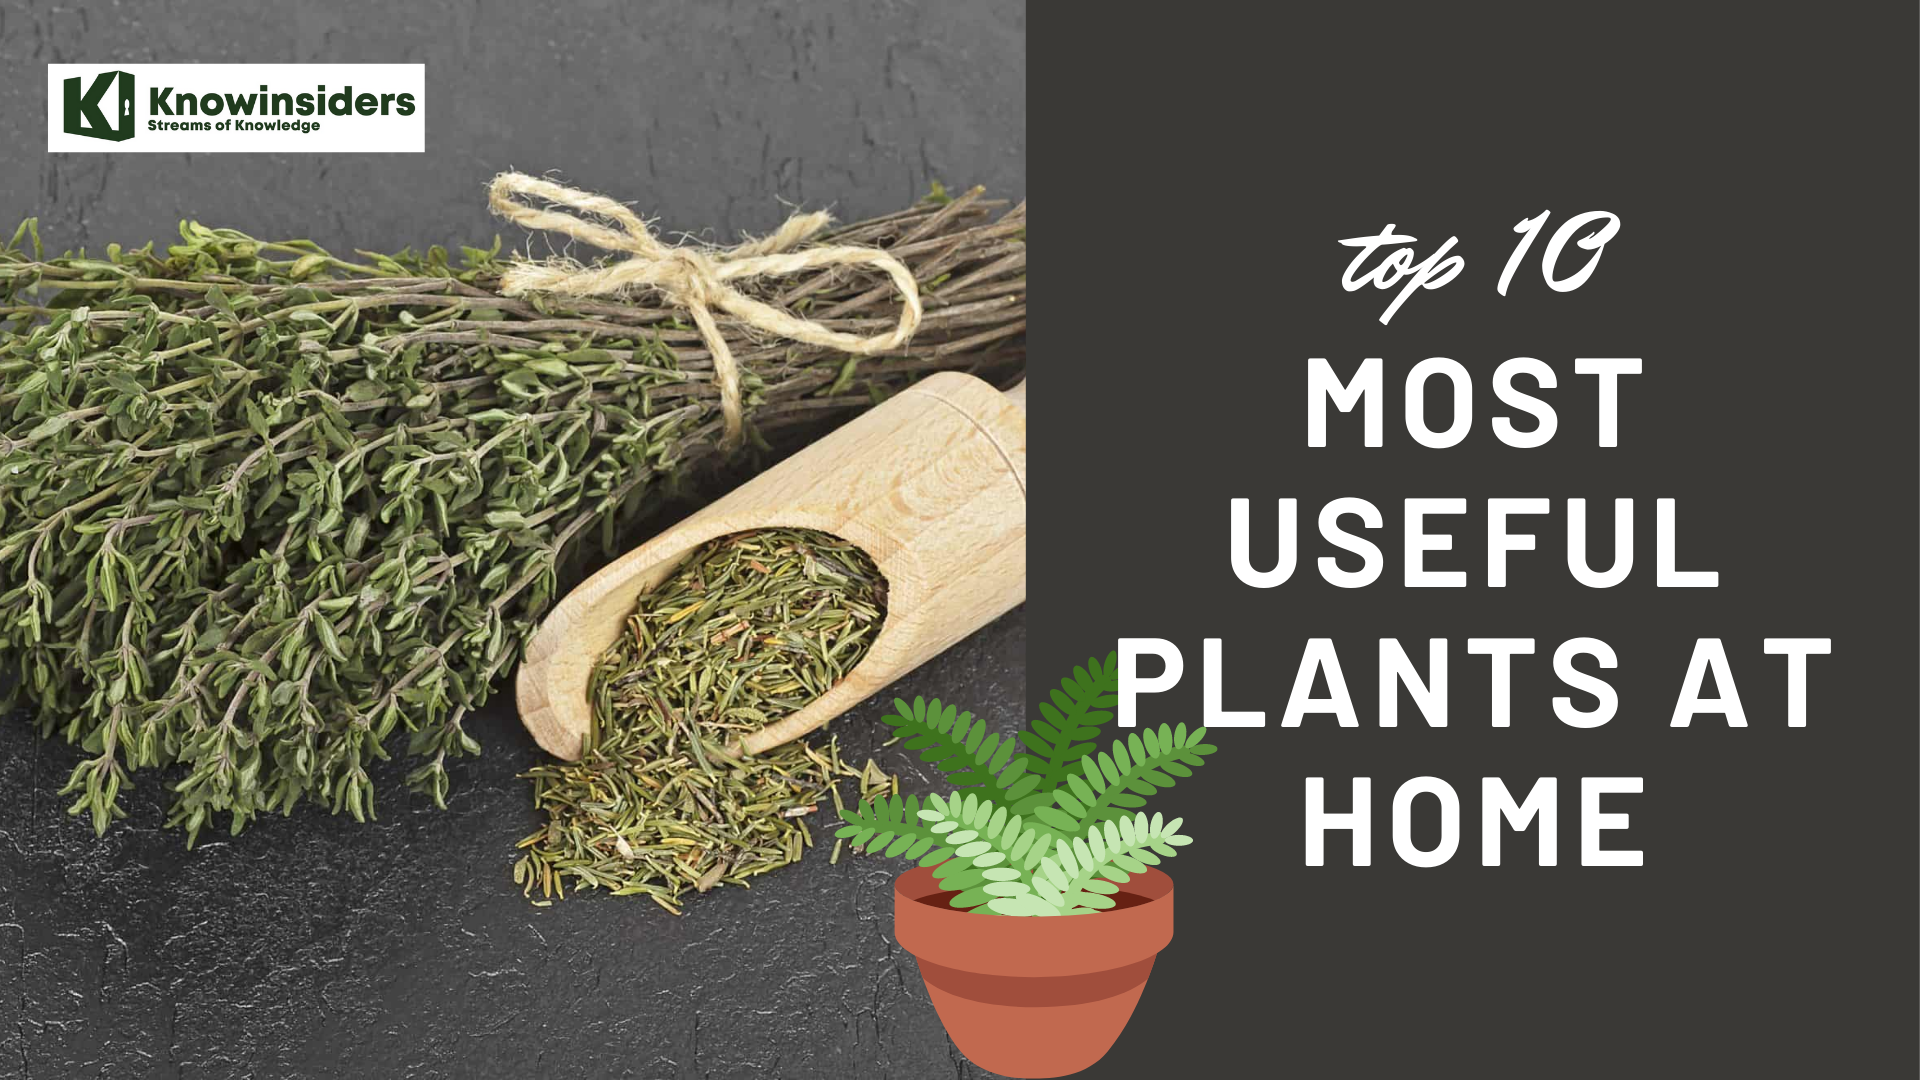 Top 10 most useful plants at home 